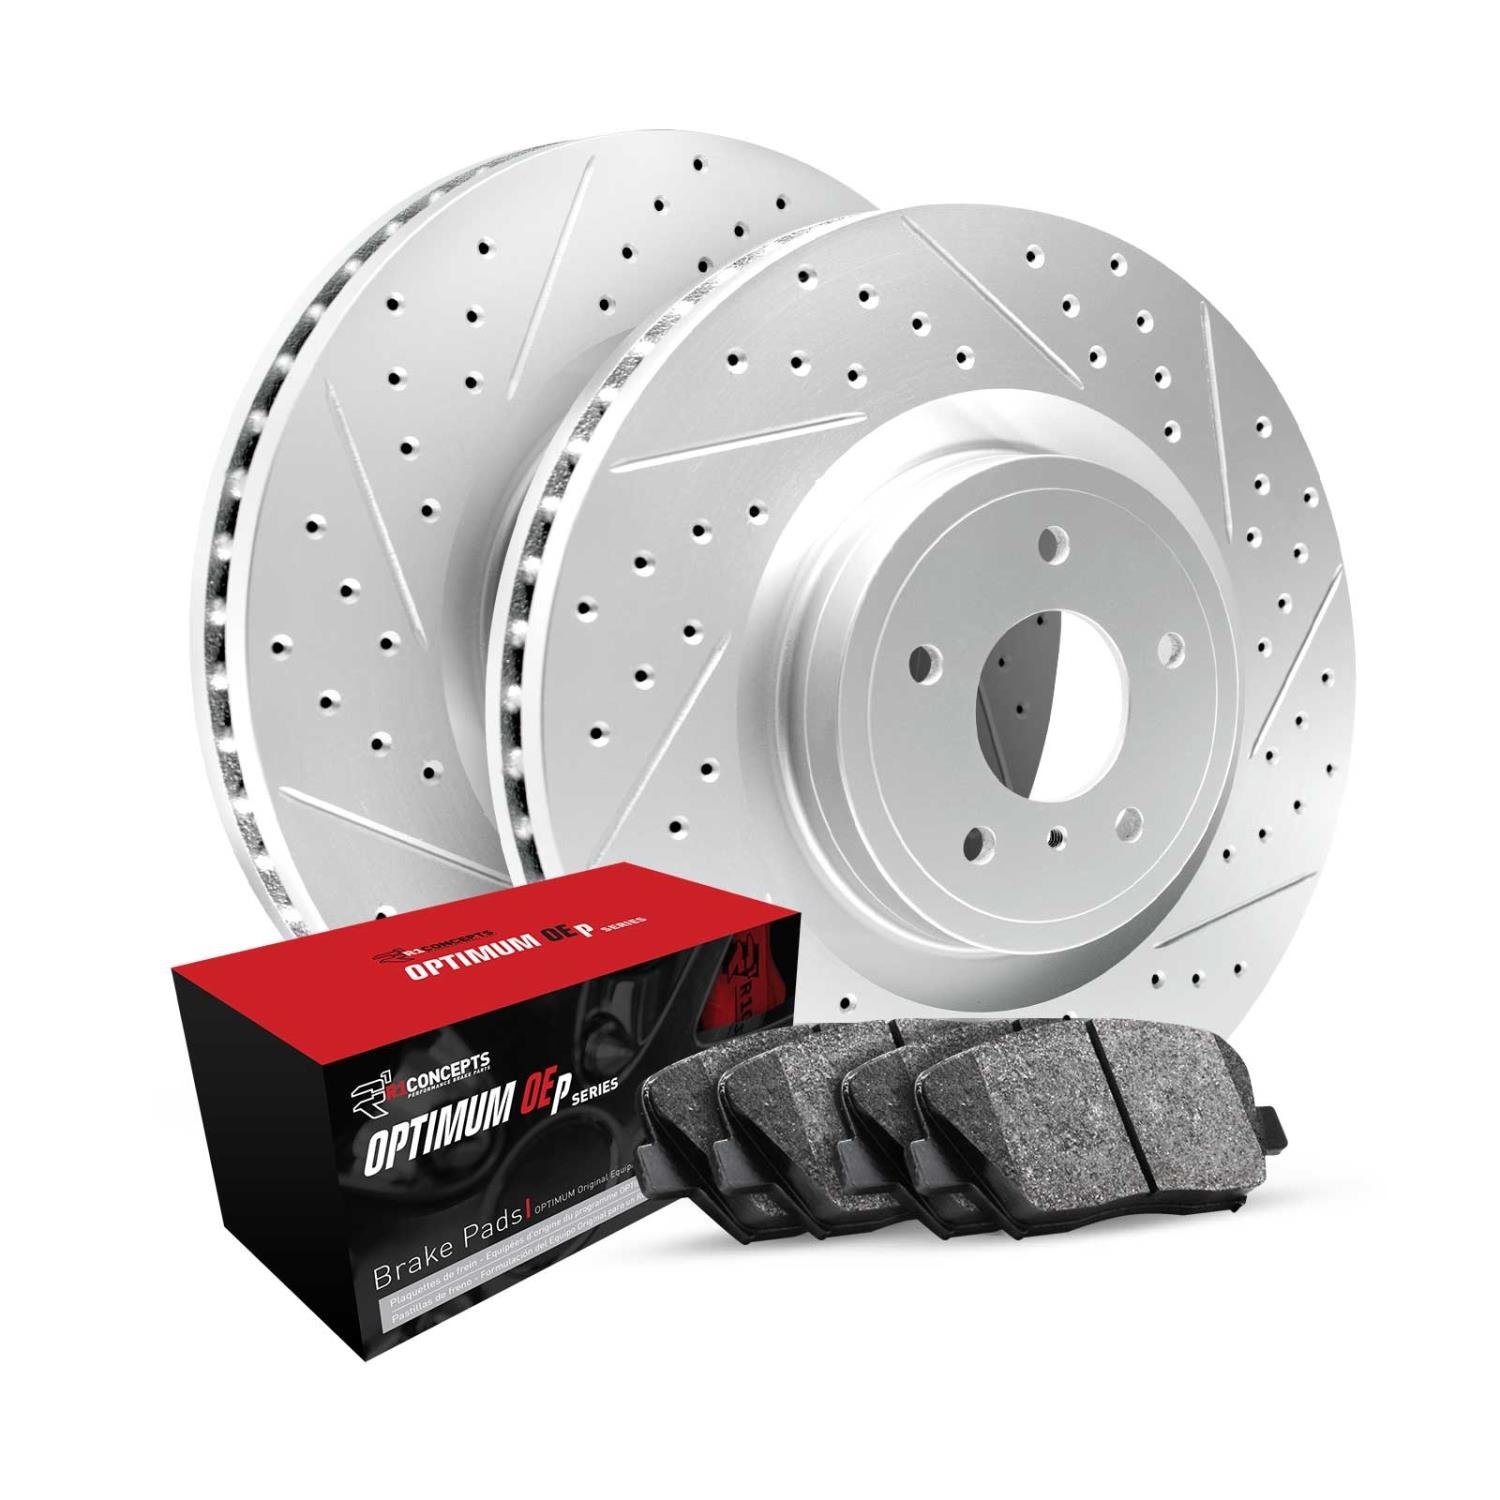 GEO-Carbon Drilled & Slotted Brake Rotor Set w/Optimum OE Pads, 1996-2008 Fits Multiple Makes/Models, Position: Rear